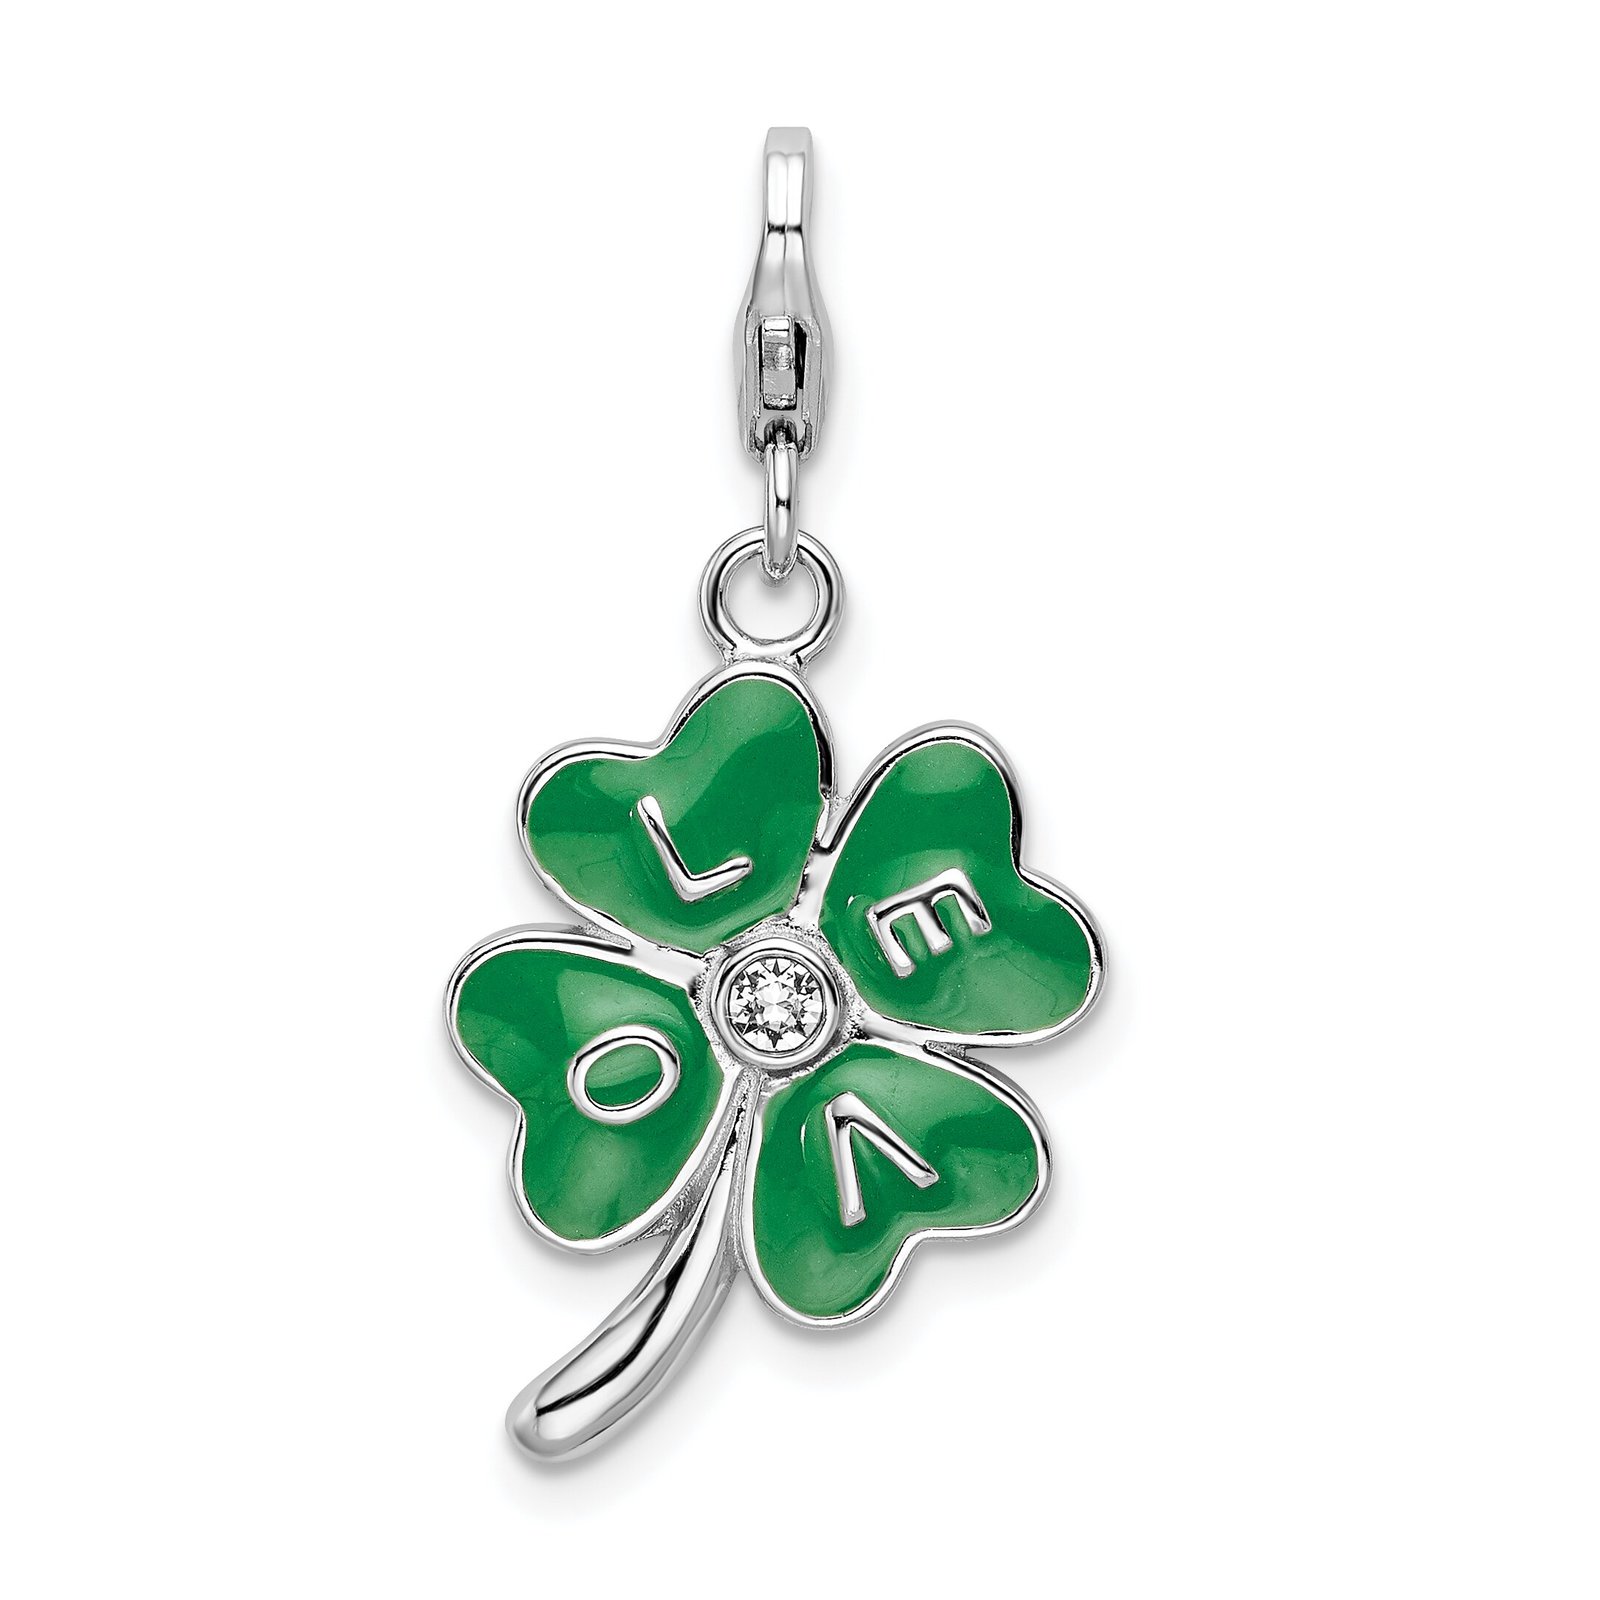 Primary image for Sterling Silver 3D Enamel 4 Leaf Clover Lobster Clasp Charm Pendant 31mm x 13mm